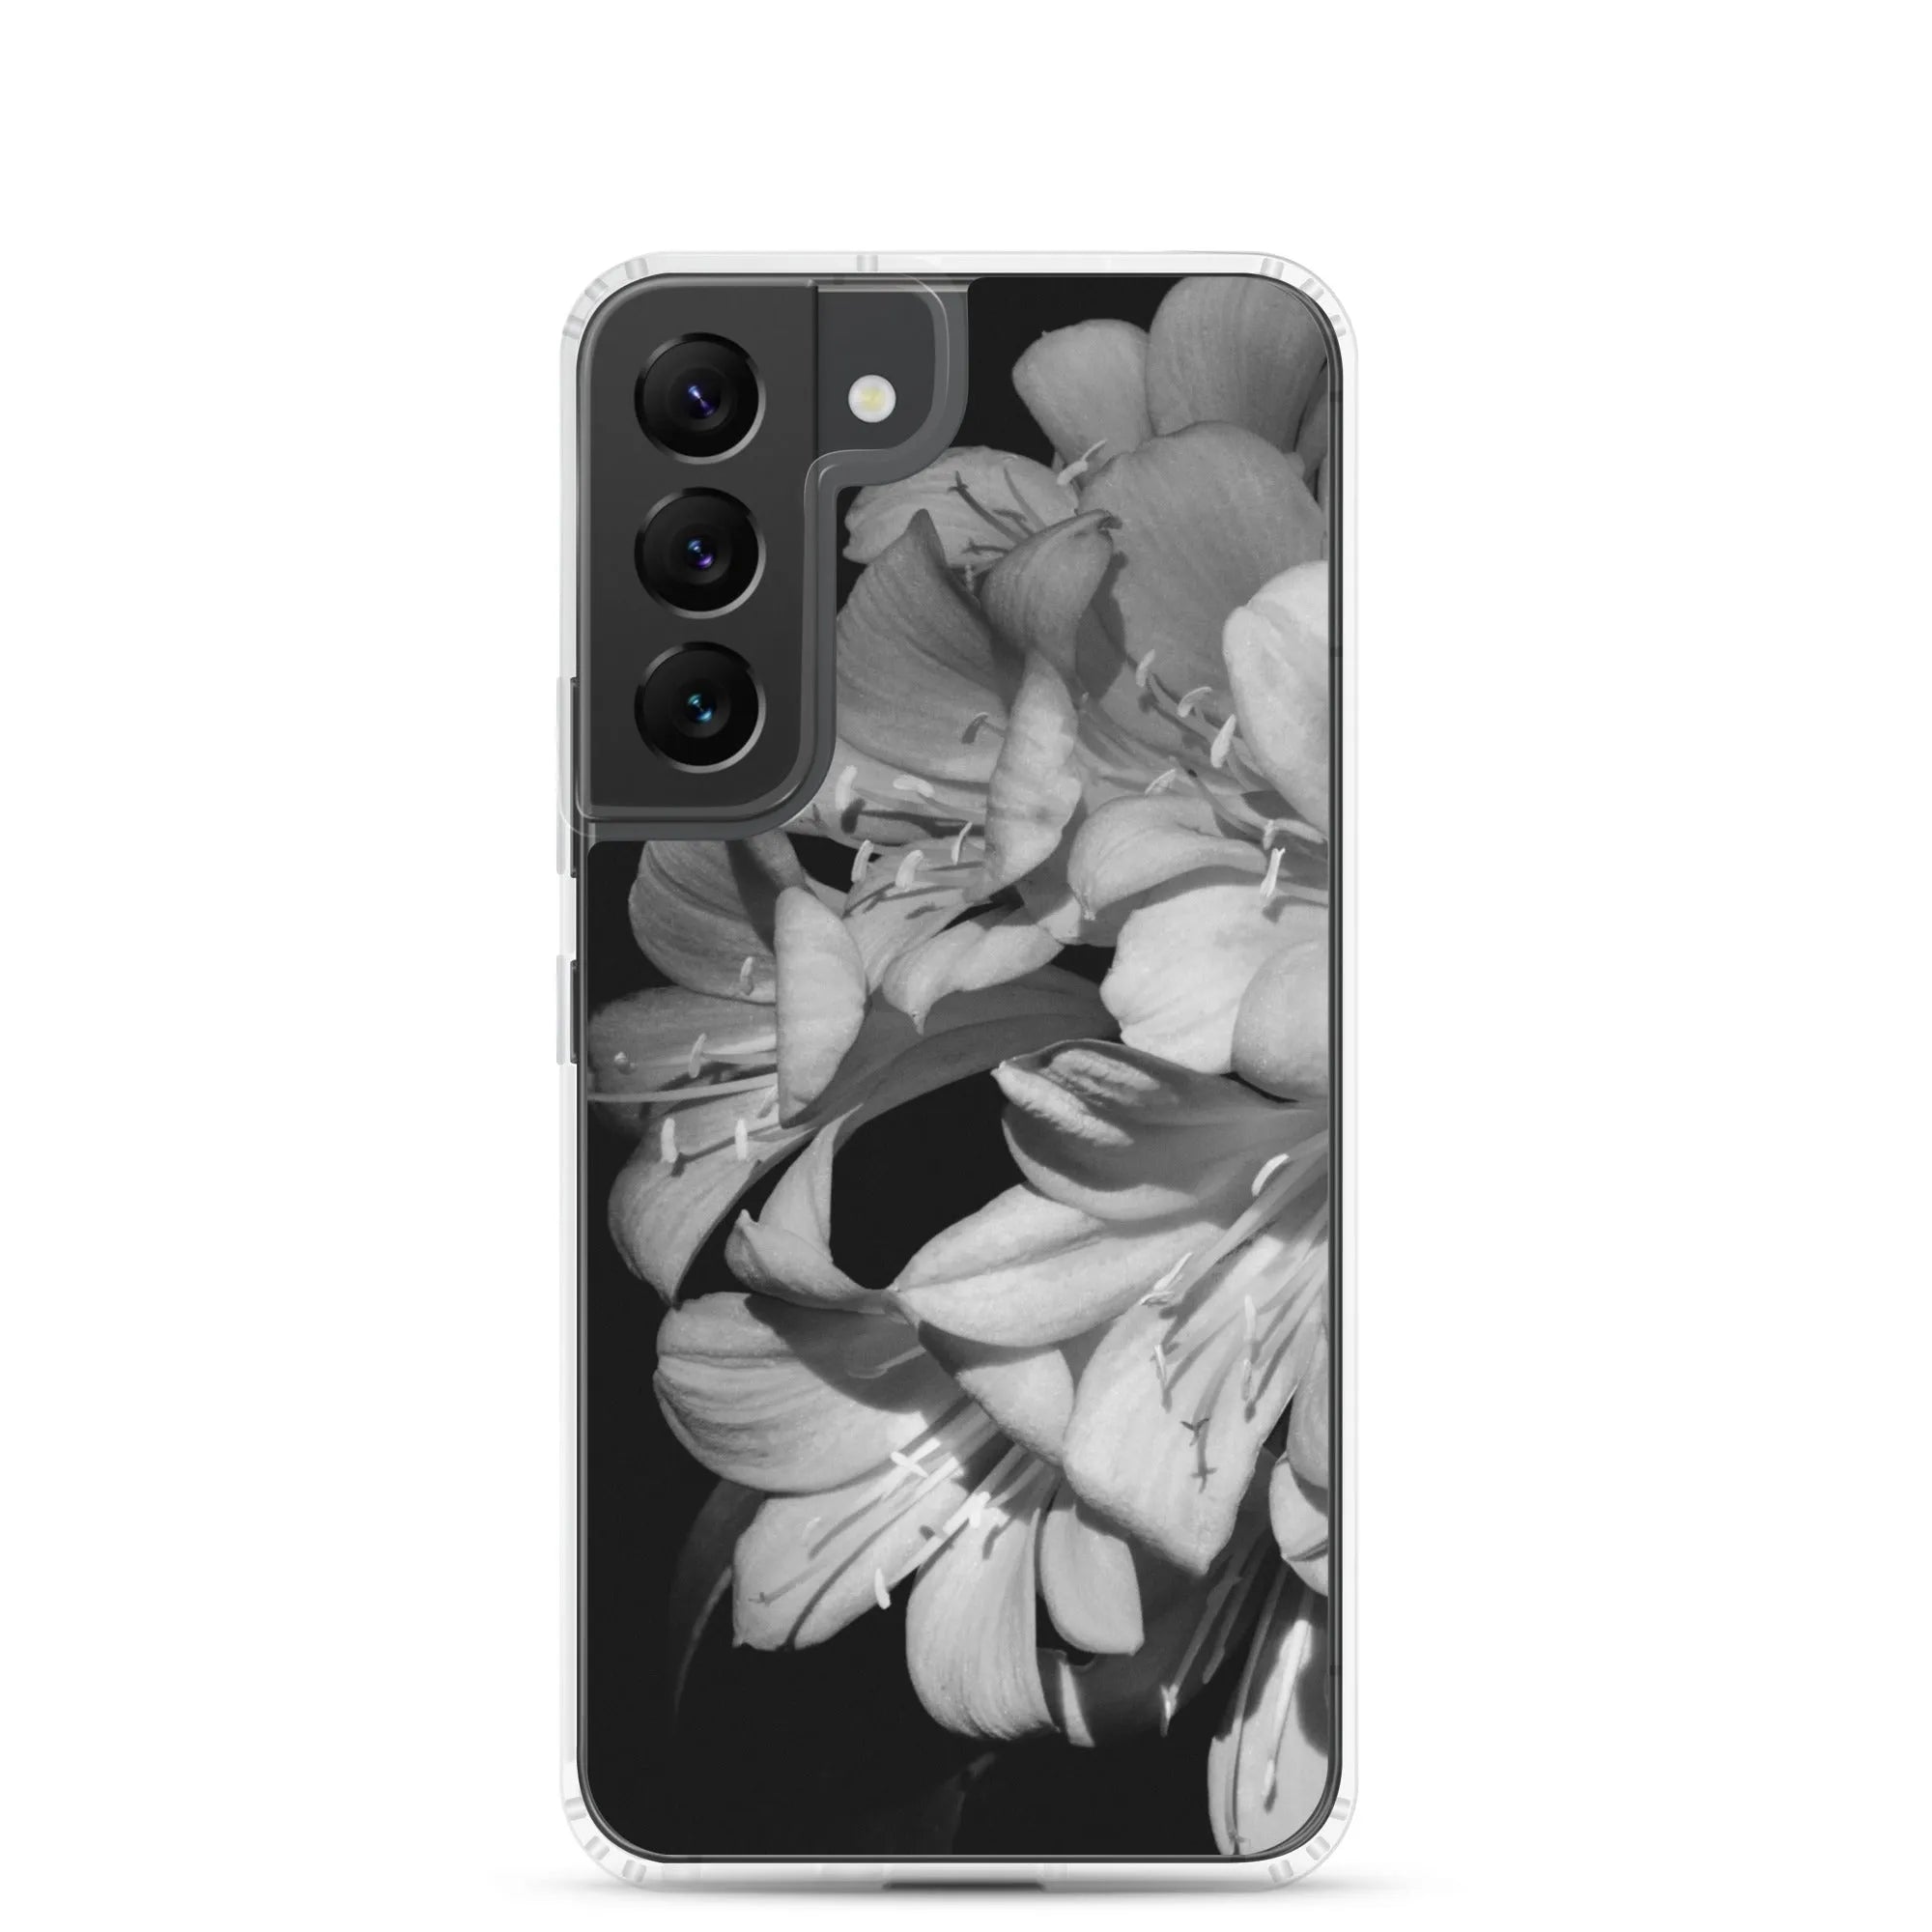 Flower Power Samsung Galaxy Case - black And White - Samsung Galaxy S22 - Mobile Phone Cases - Aesthetic Art